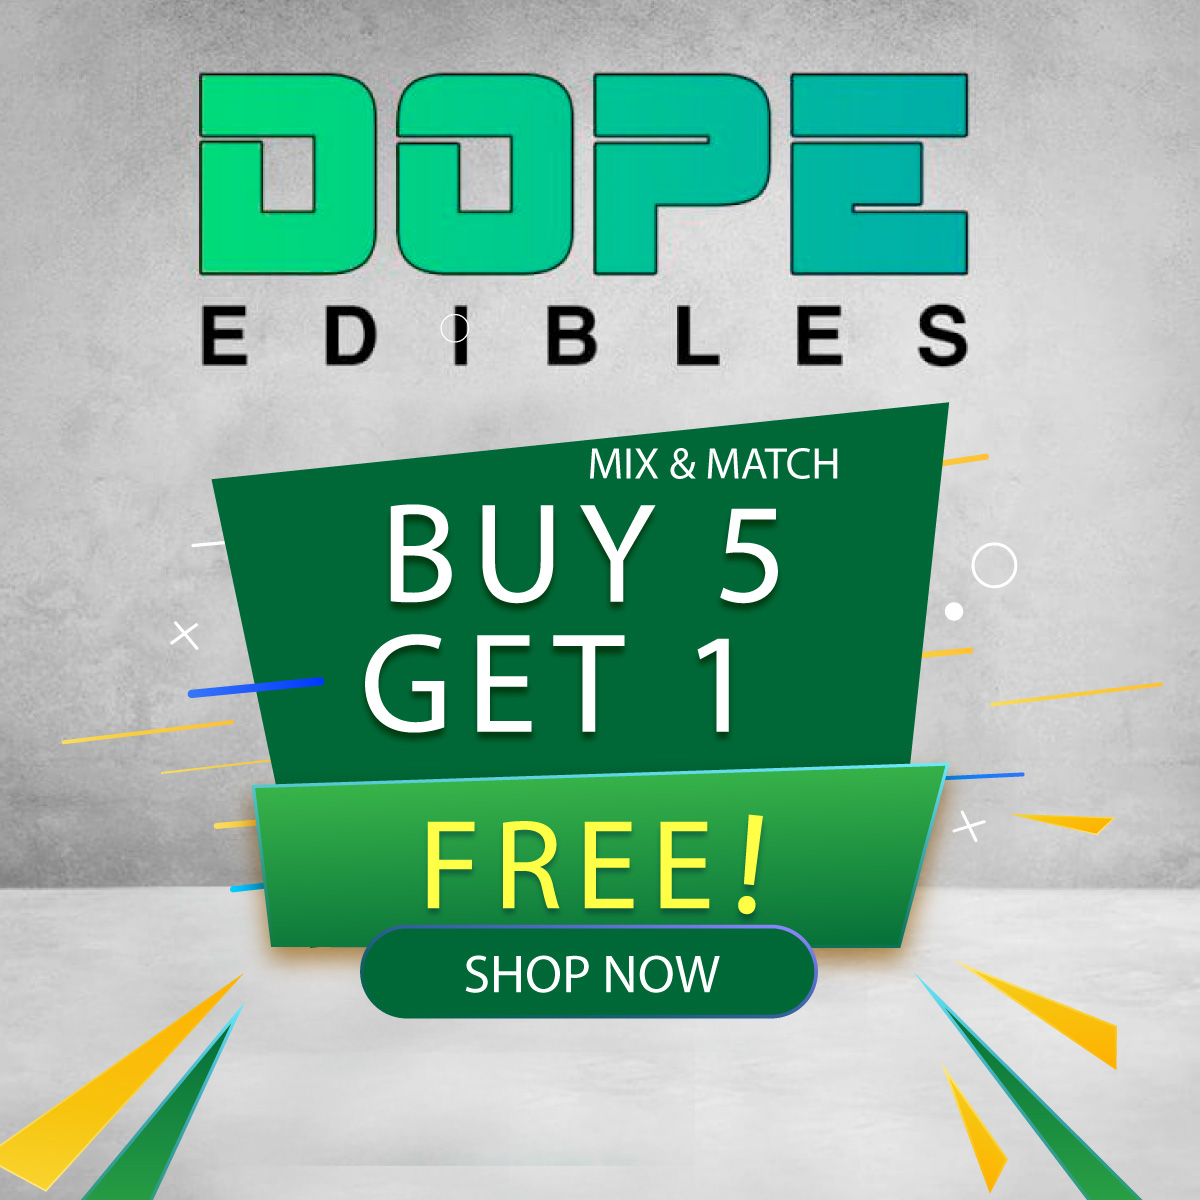 Mix & Match DOPE Edibles Buy 5 Get 1 FREE